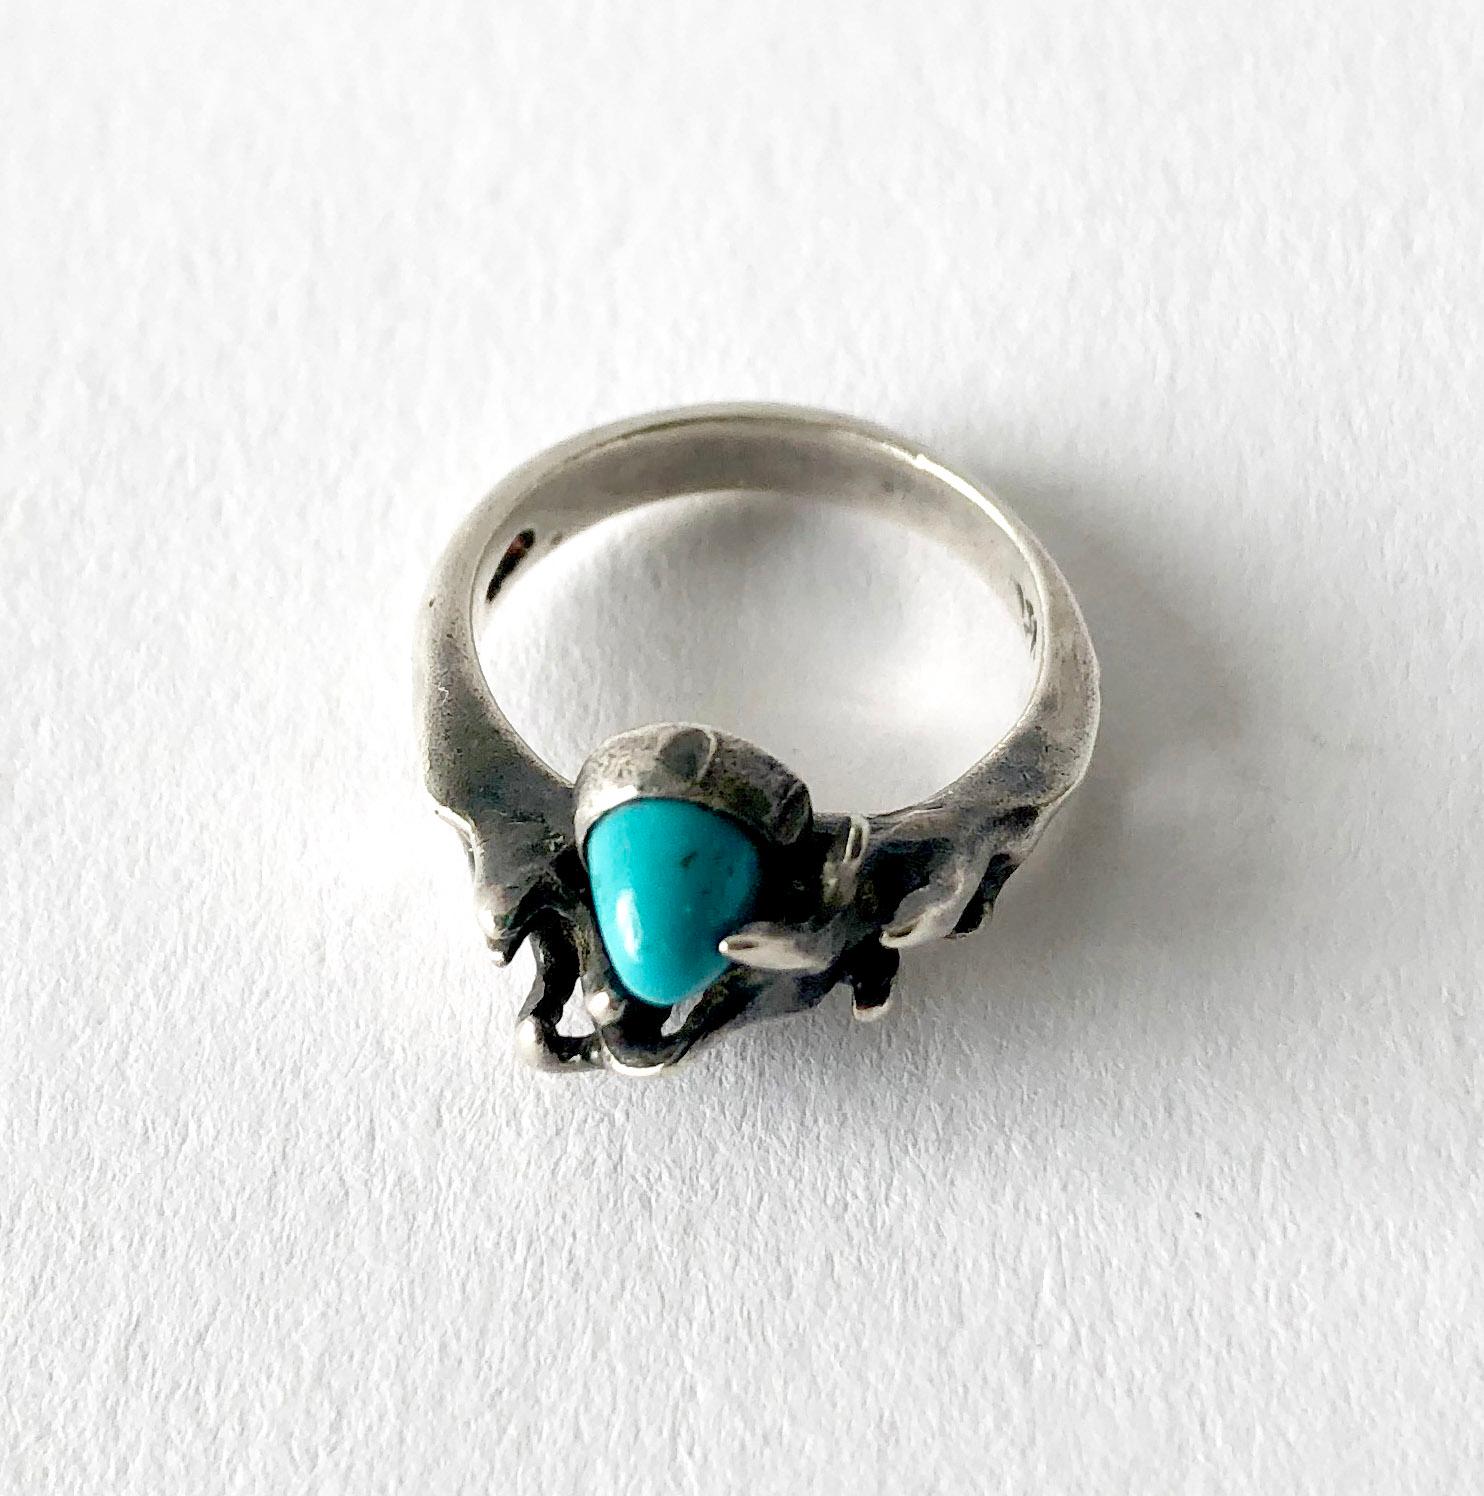 Sterling silver and turquoise organic modernist ring created by sculptor and jeweler Jack Boyd of San Diego, California.  Ring is a finger size 6 and is signed with the artists hallmark of JB.  A modern alternative to an engagement or wedding ring. 